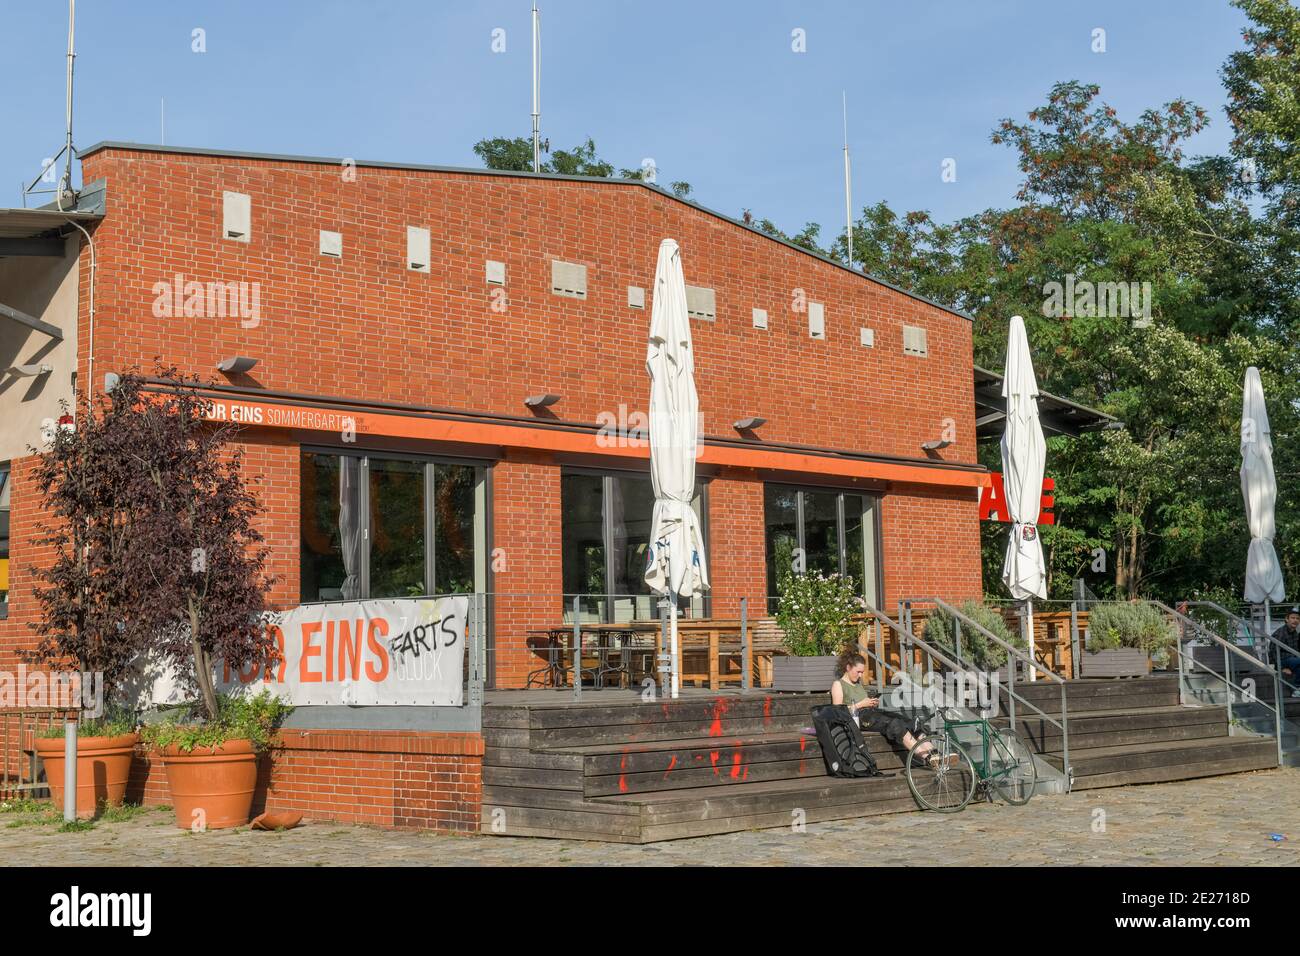 Eins High Resolution Stock Photography and Images - Alamy